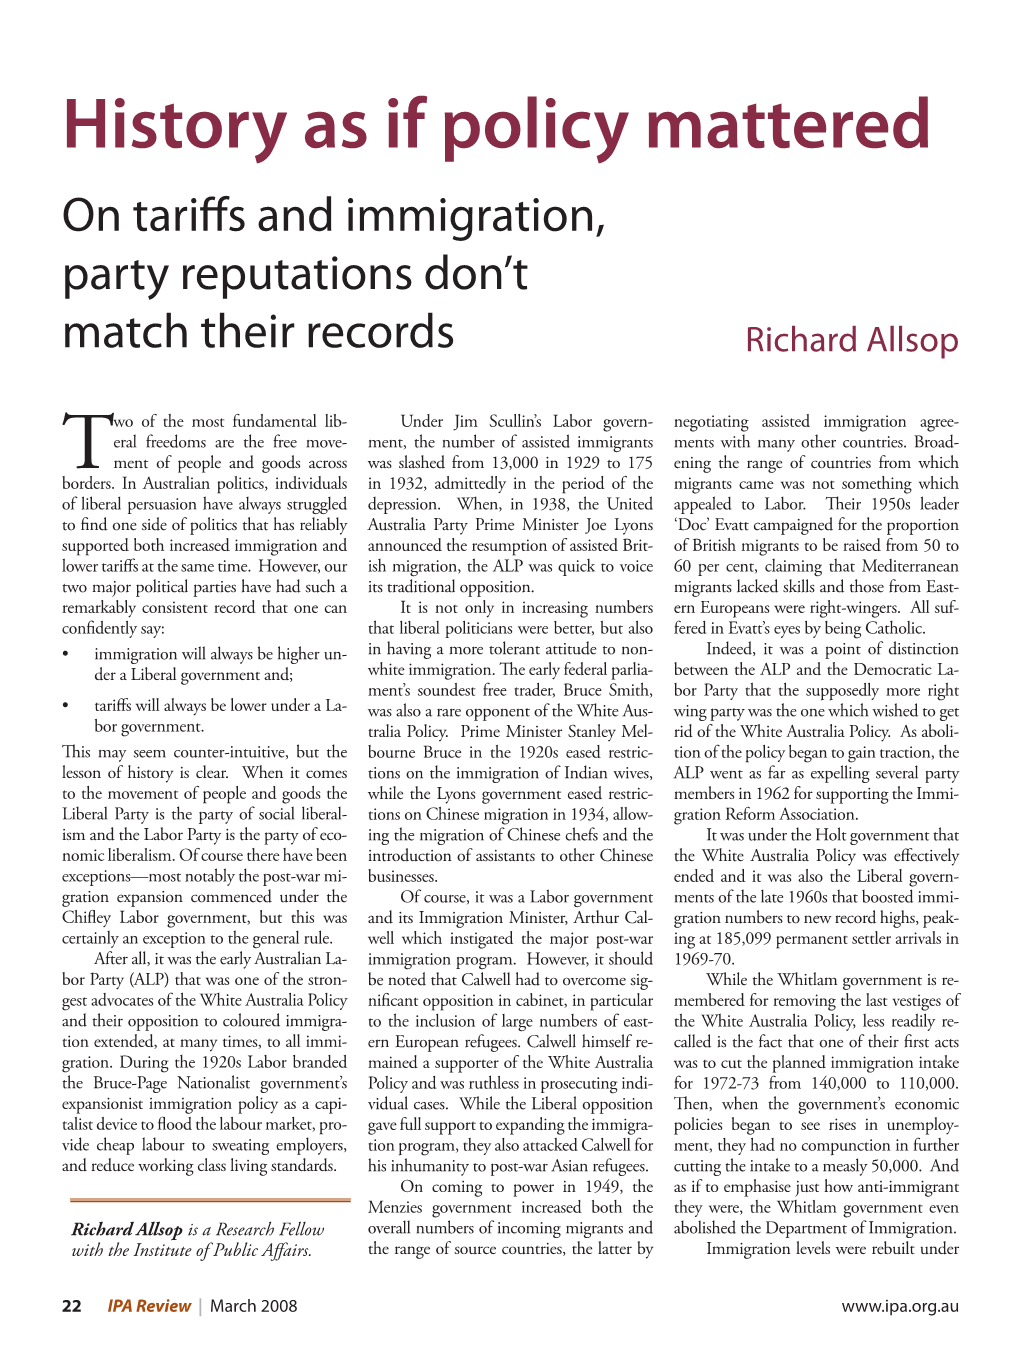 History As If Policy Mattered on Tariffs and Immigration, Party Reputations Don’T Match Their Records Richard Allsop